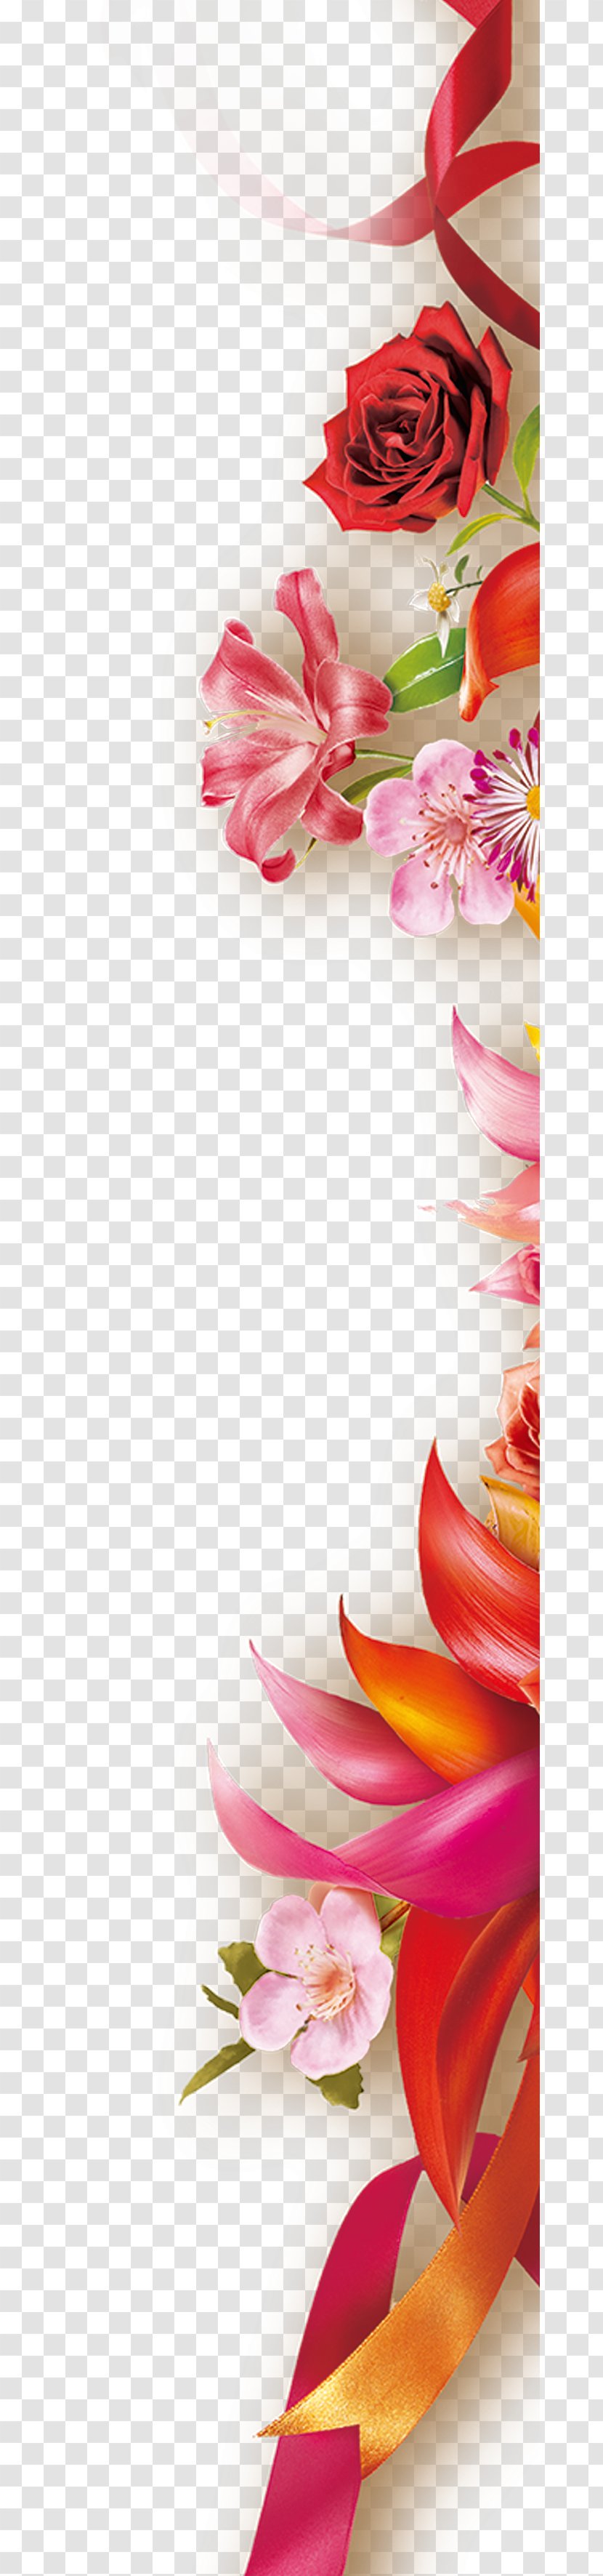 Ribbon Flower Icon - Plant - Roses Transparent PNG